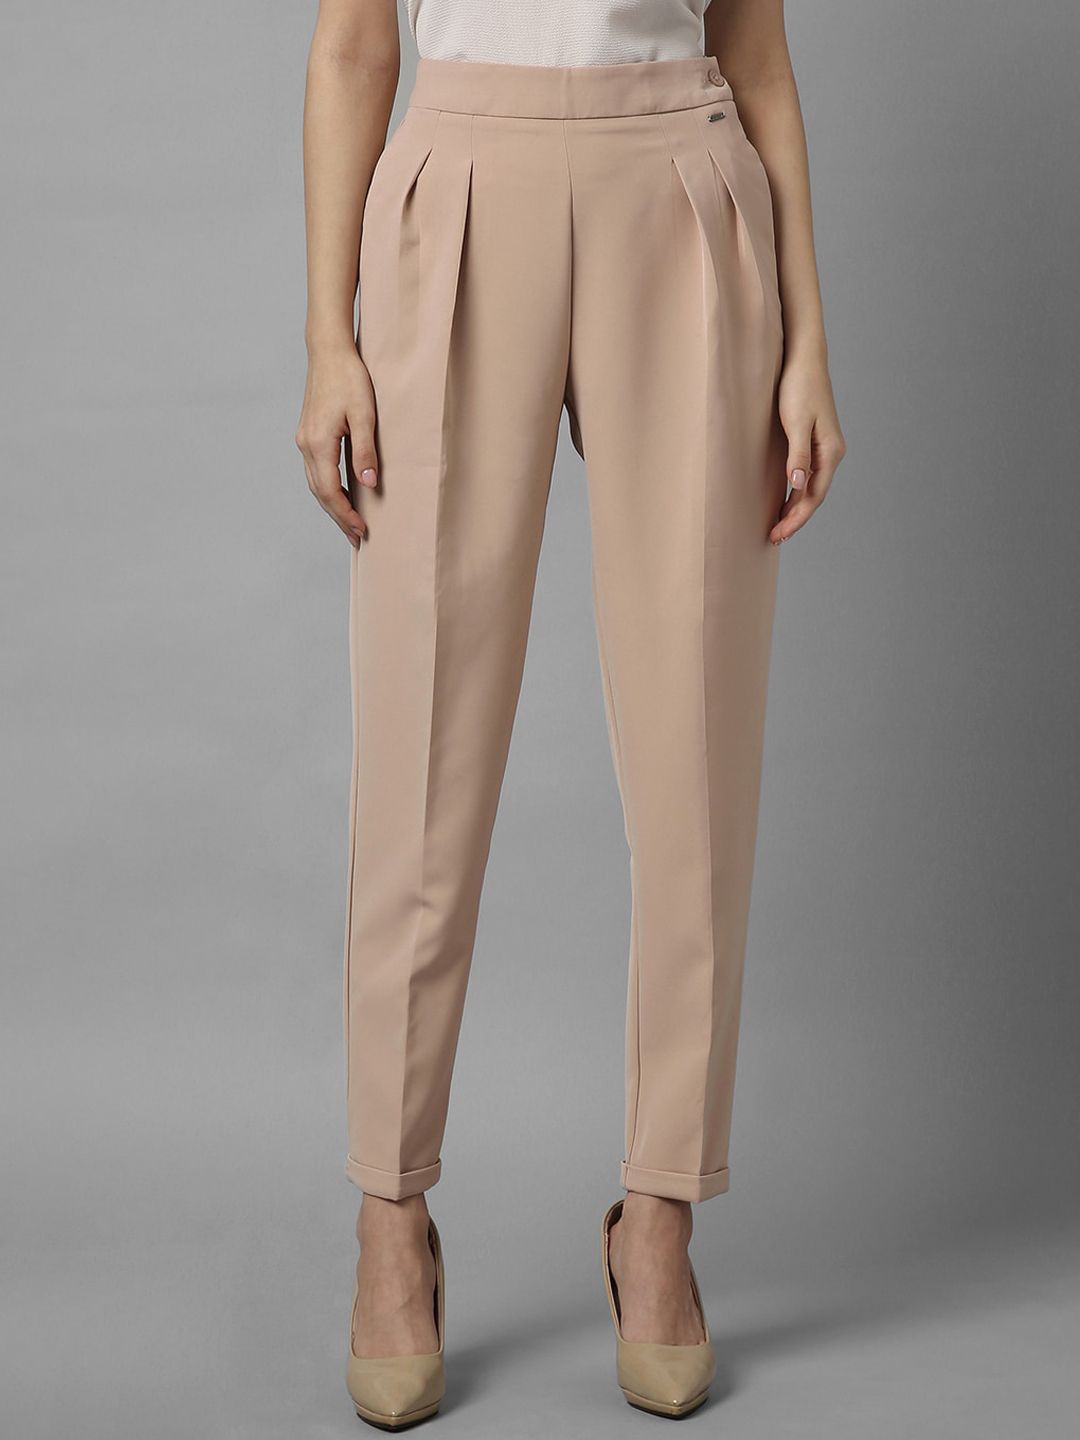 Allen Solly Woman Pleated Formal Regular Trousers Price in India